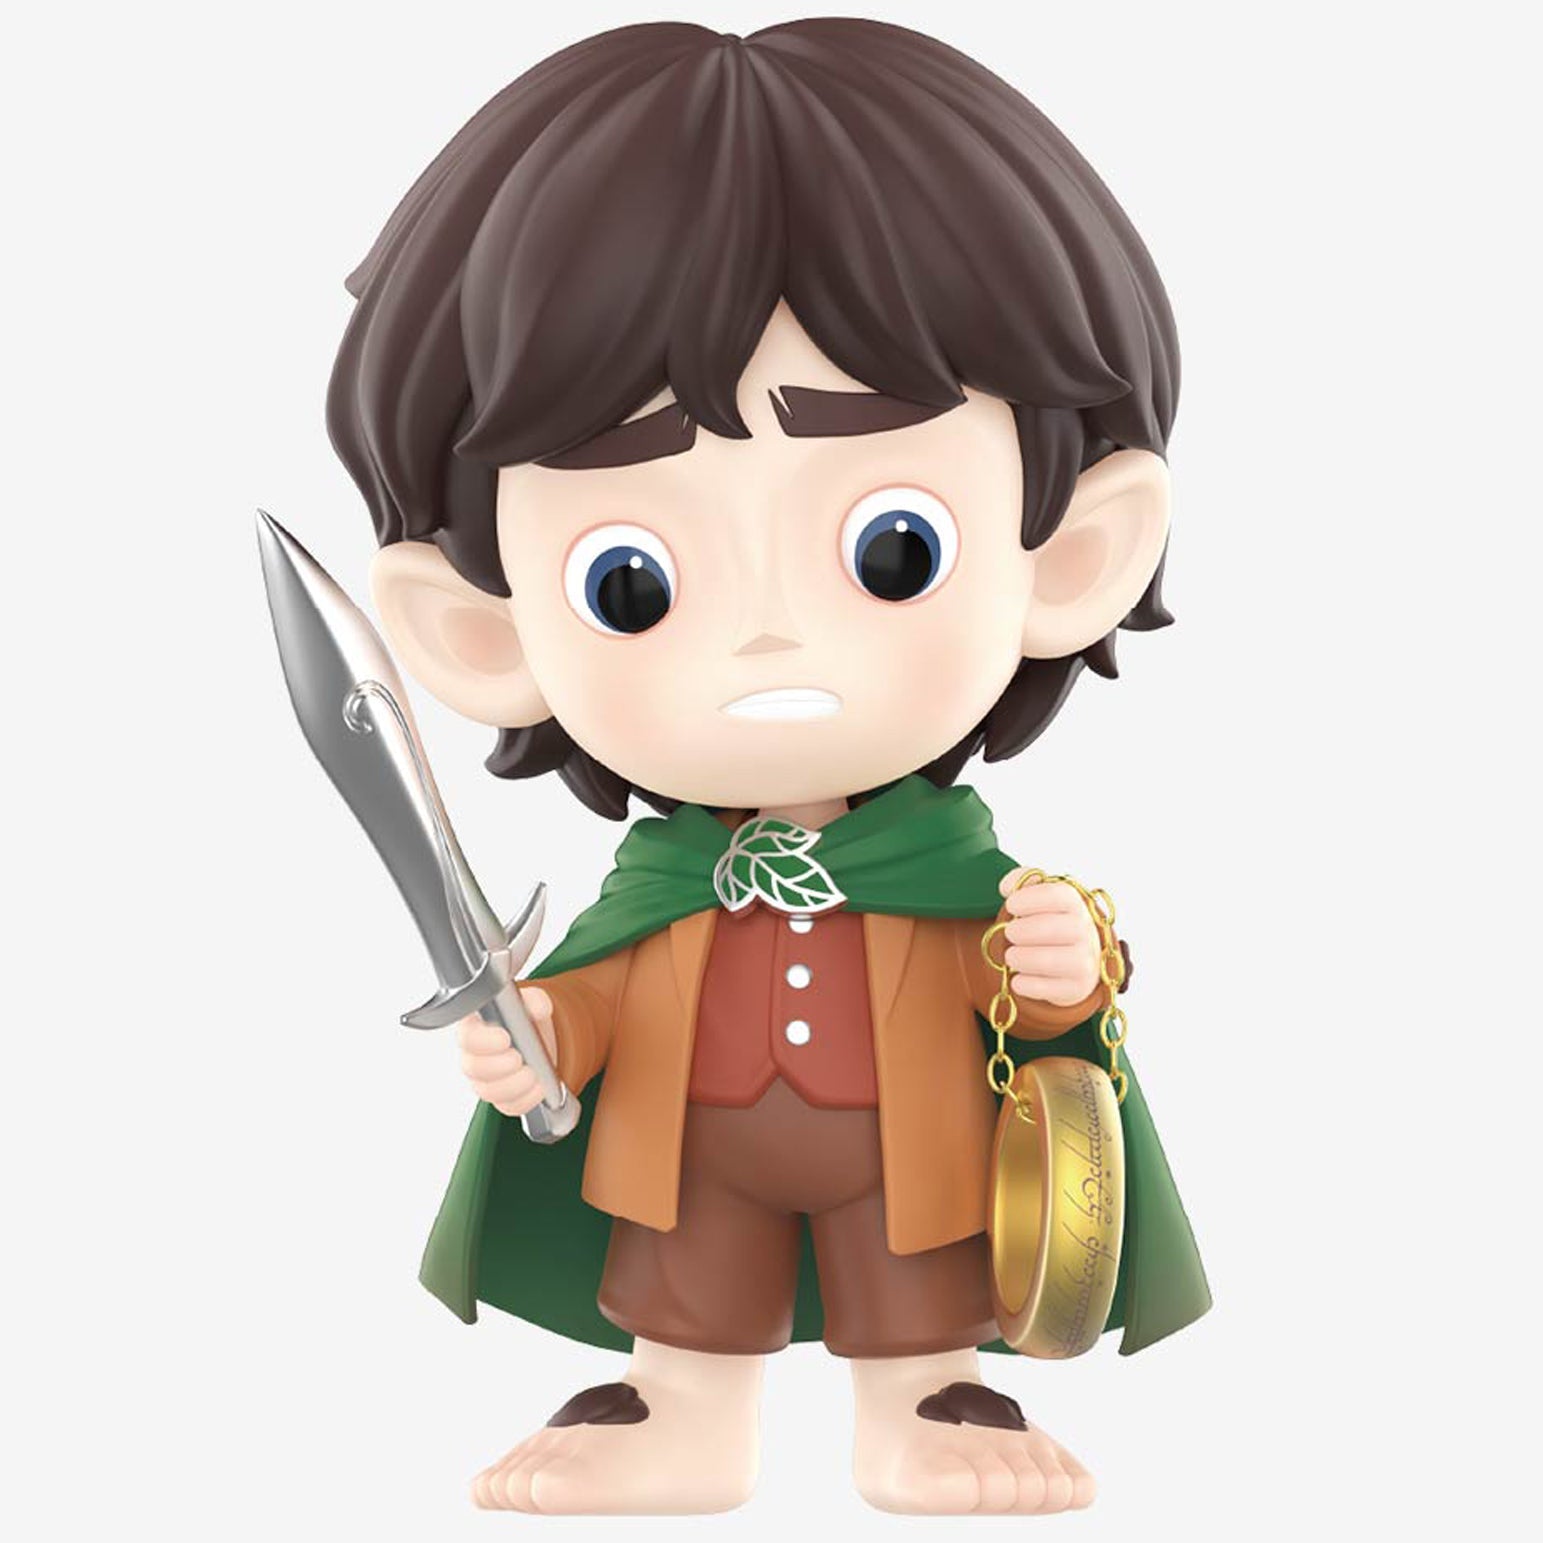 The Lord of the Rings LOTR Classic Series Figure, Blind Box - POP MART - 8